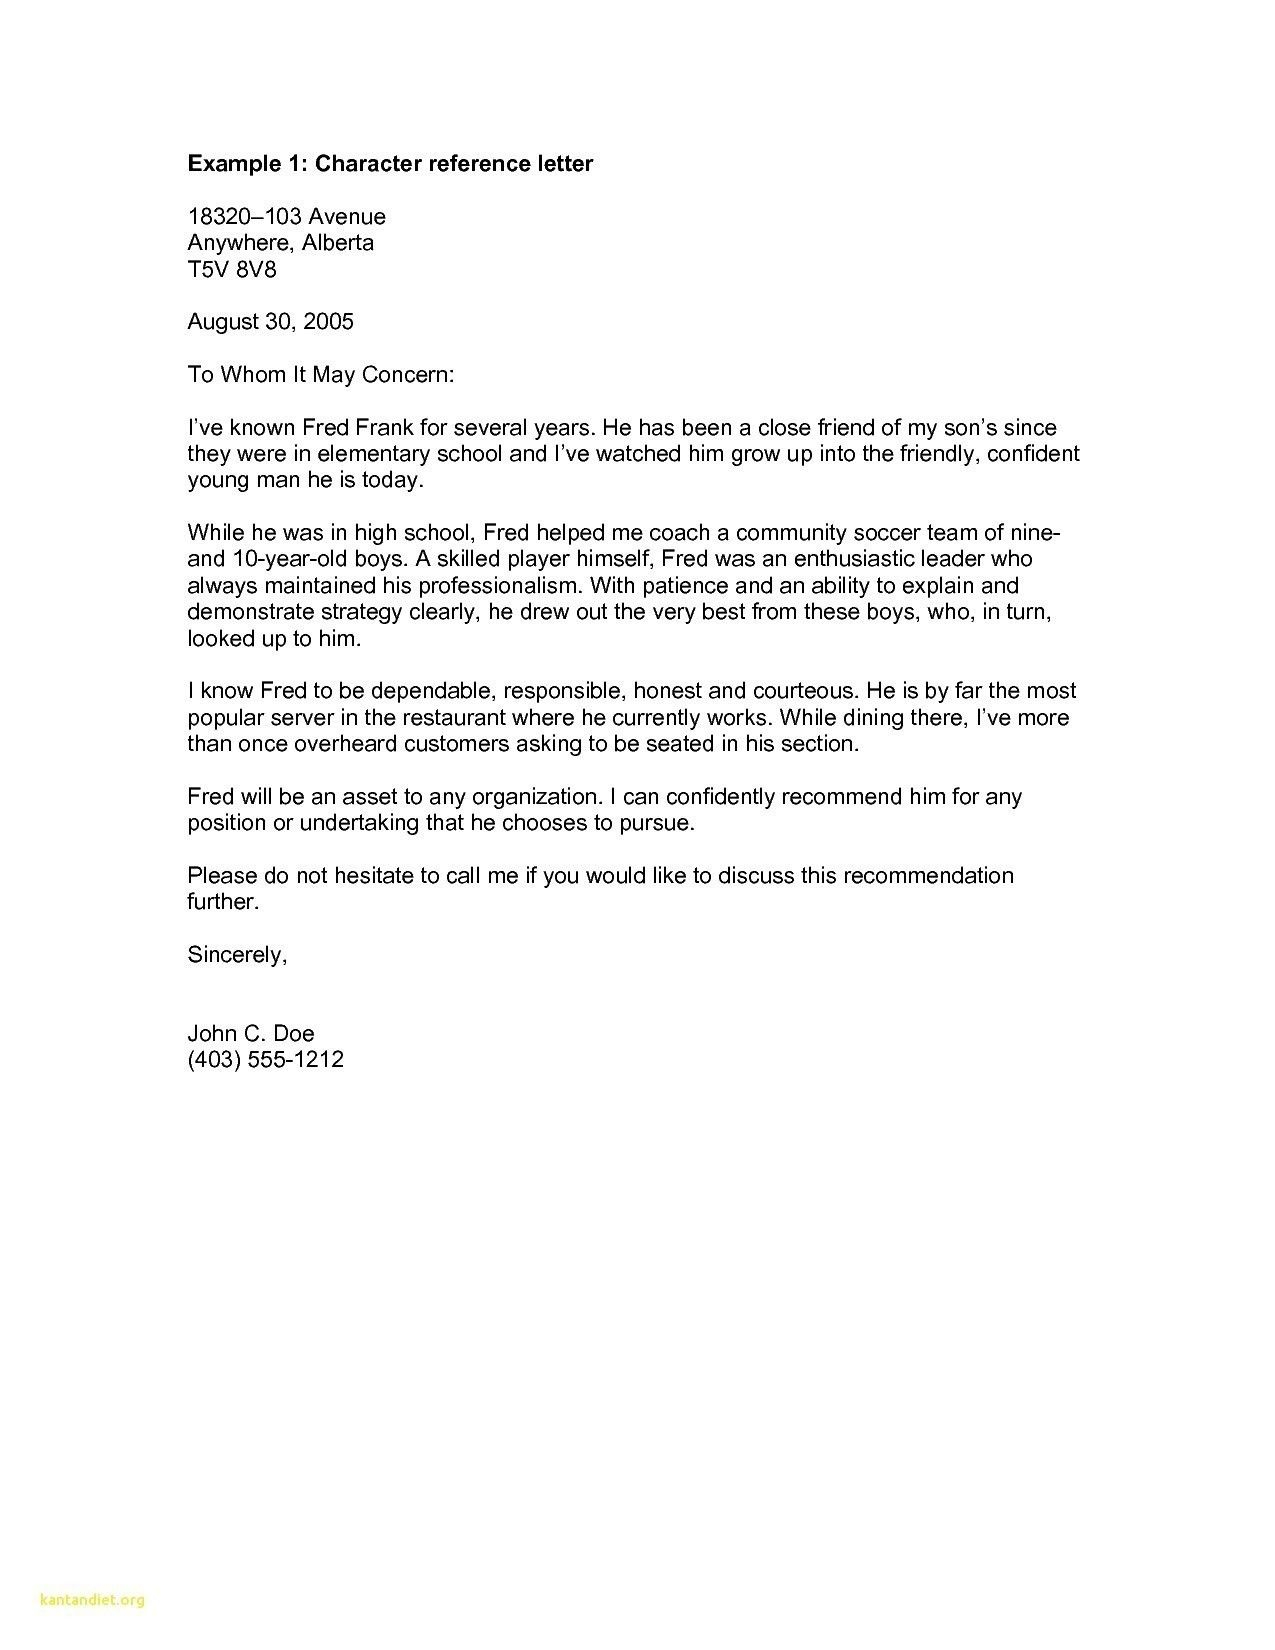 Personal Reference Letter Template Uk Why Personal Reference inside measurements 1275 X 1650